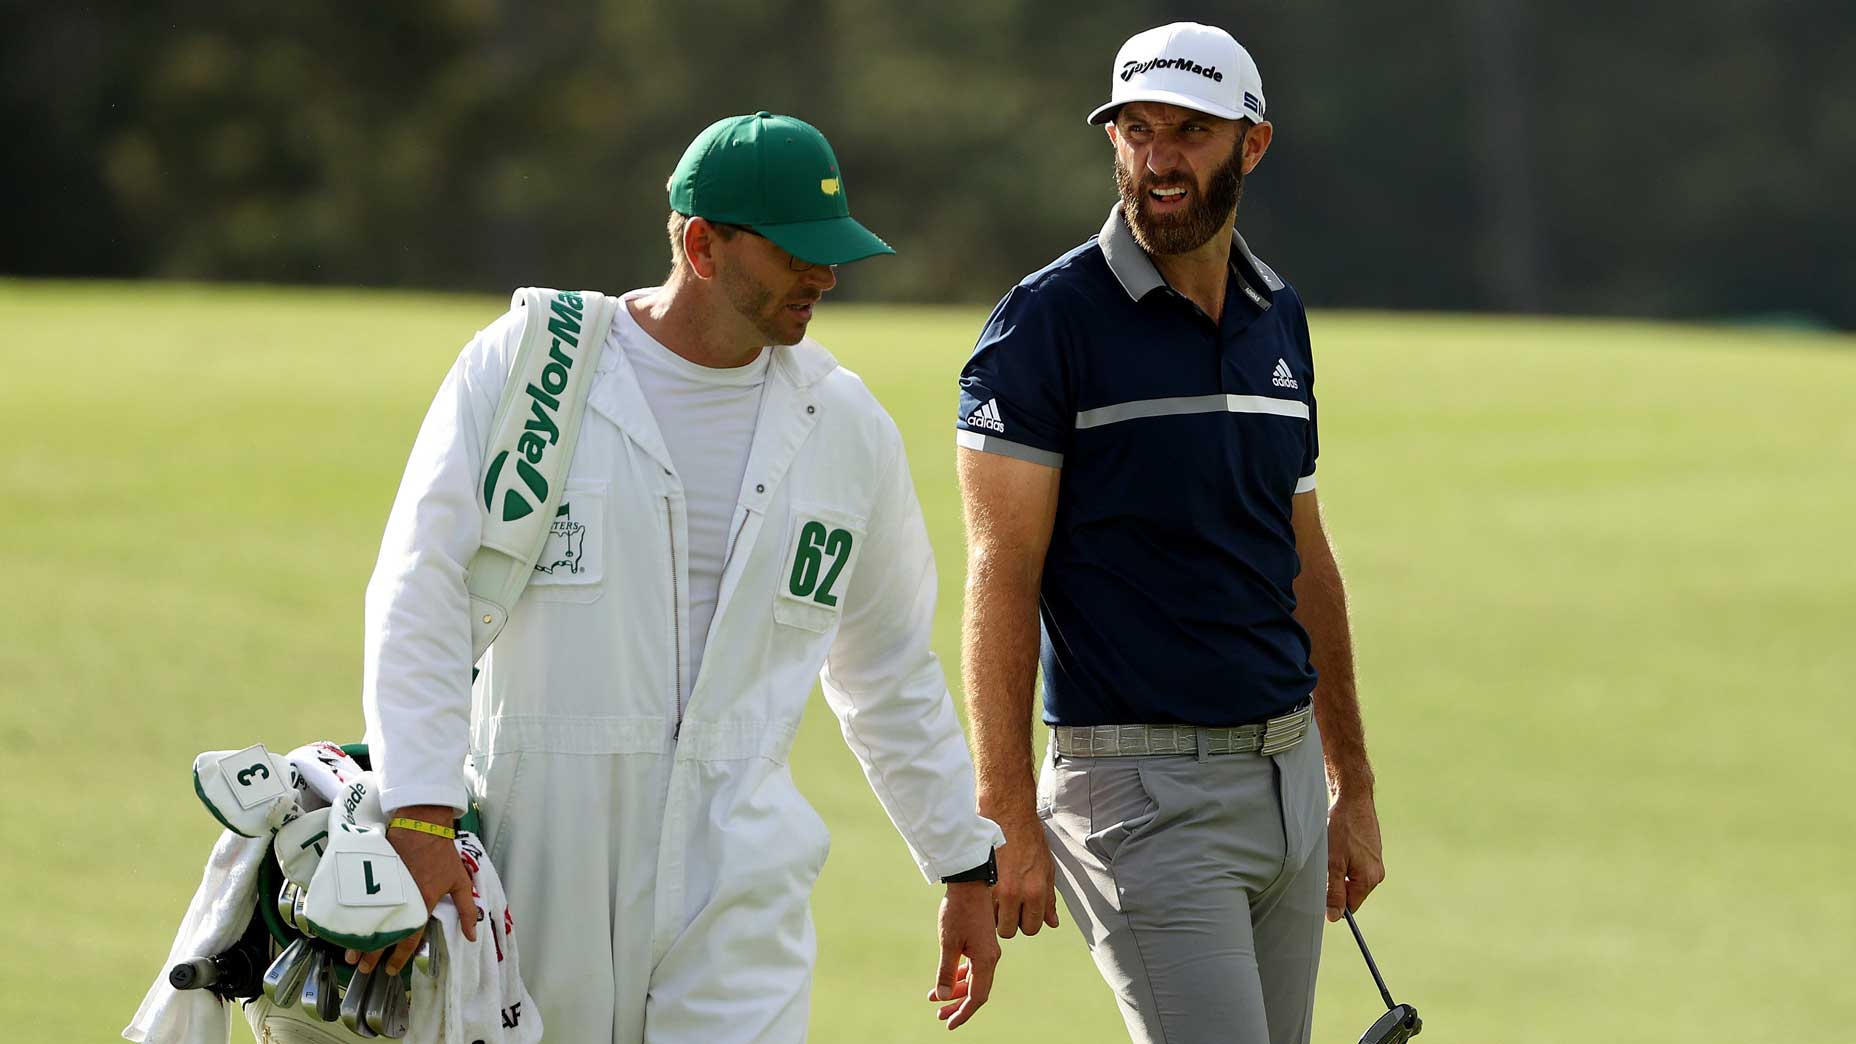 Masters live coverage: How to watch final round of 2020 Masters Sunday